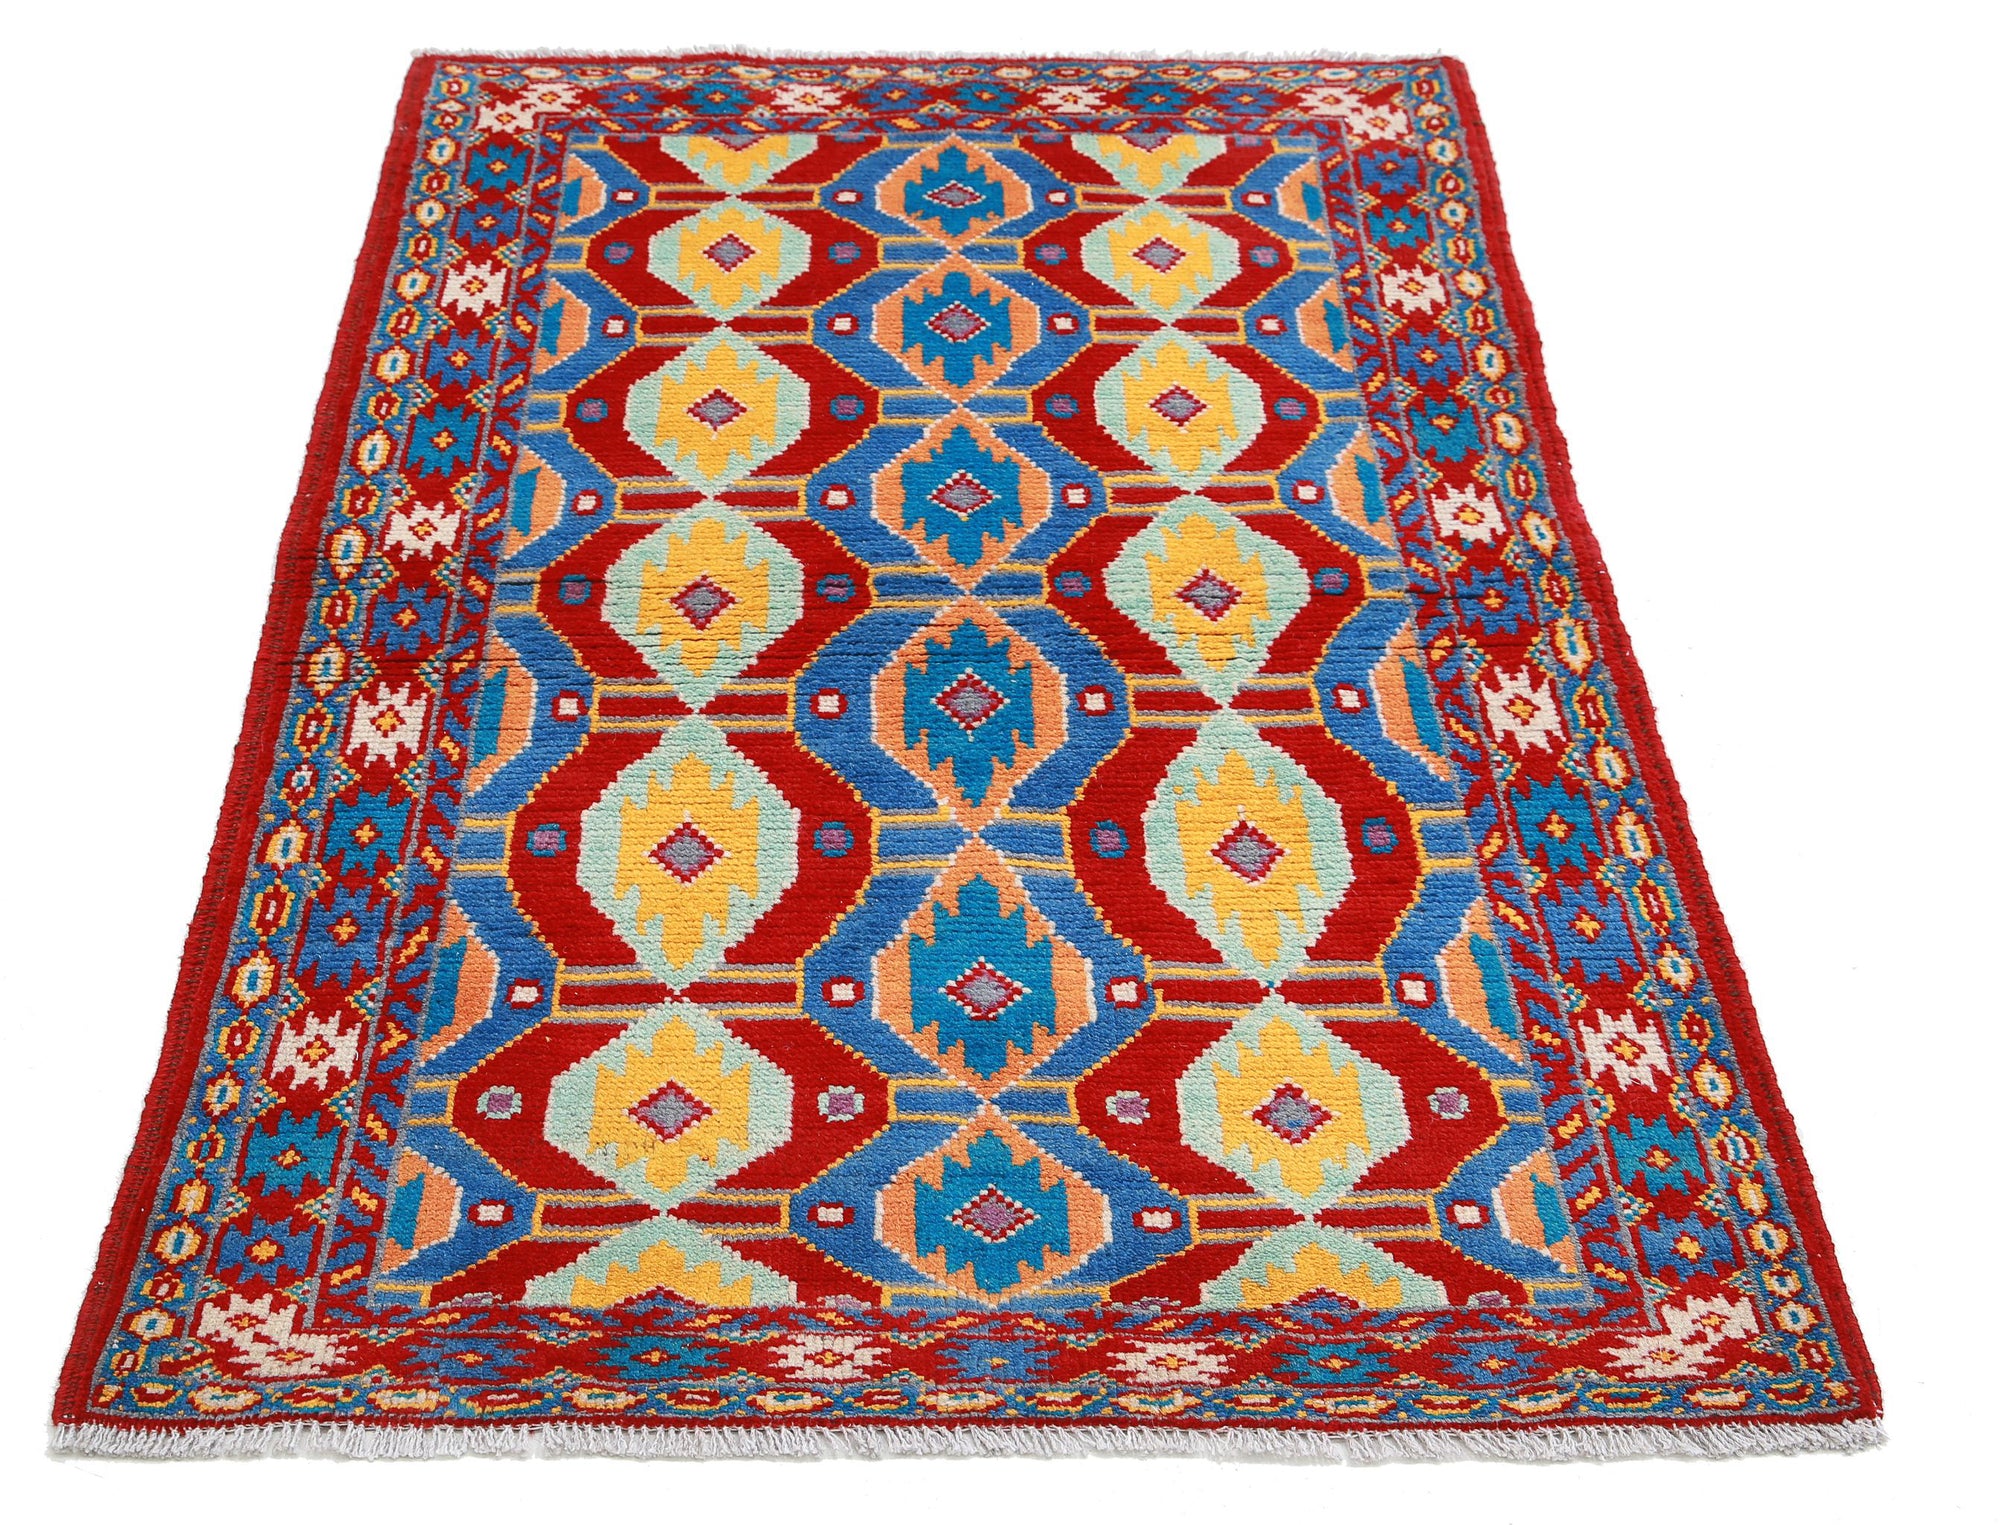 Revival-hand-knotted-qarghani-wool-rug-5014202-3.jpg